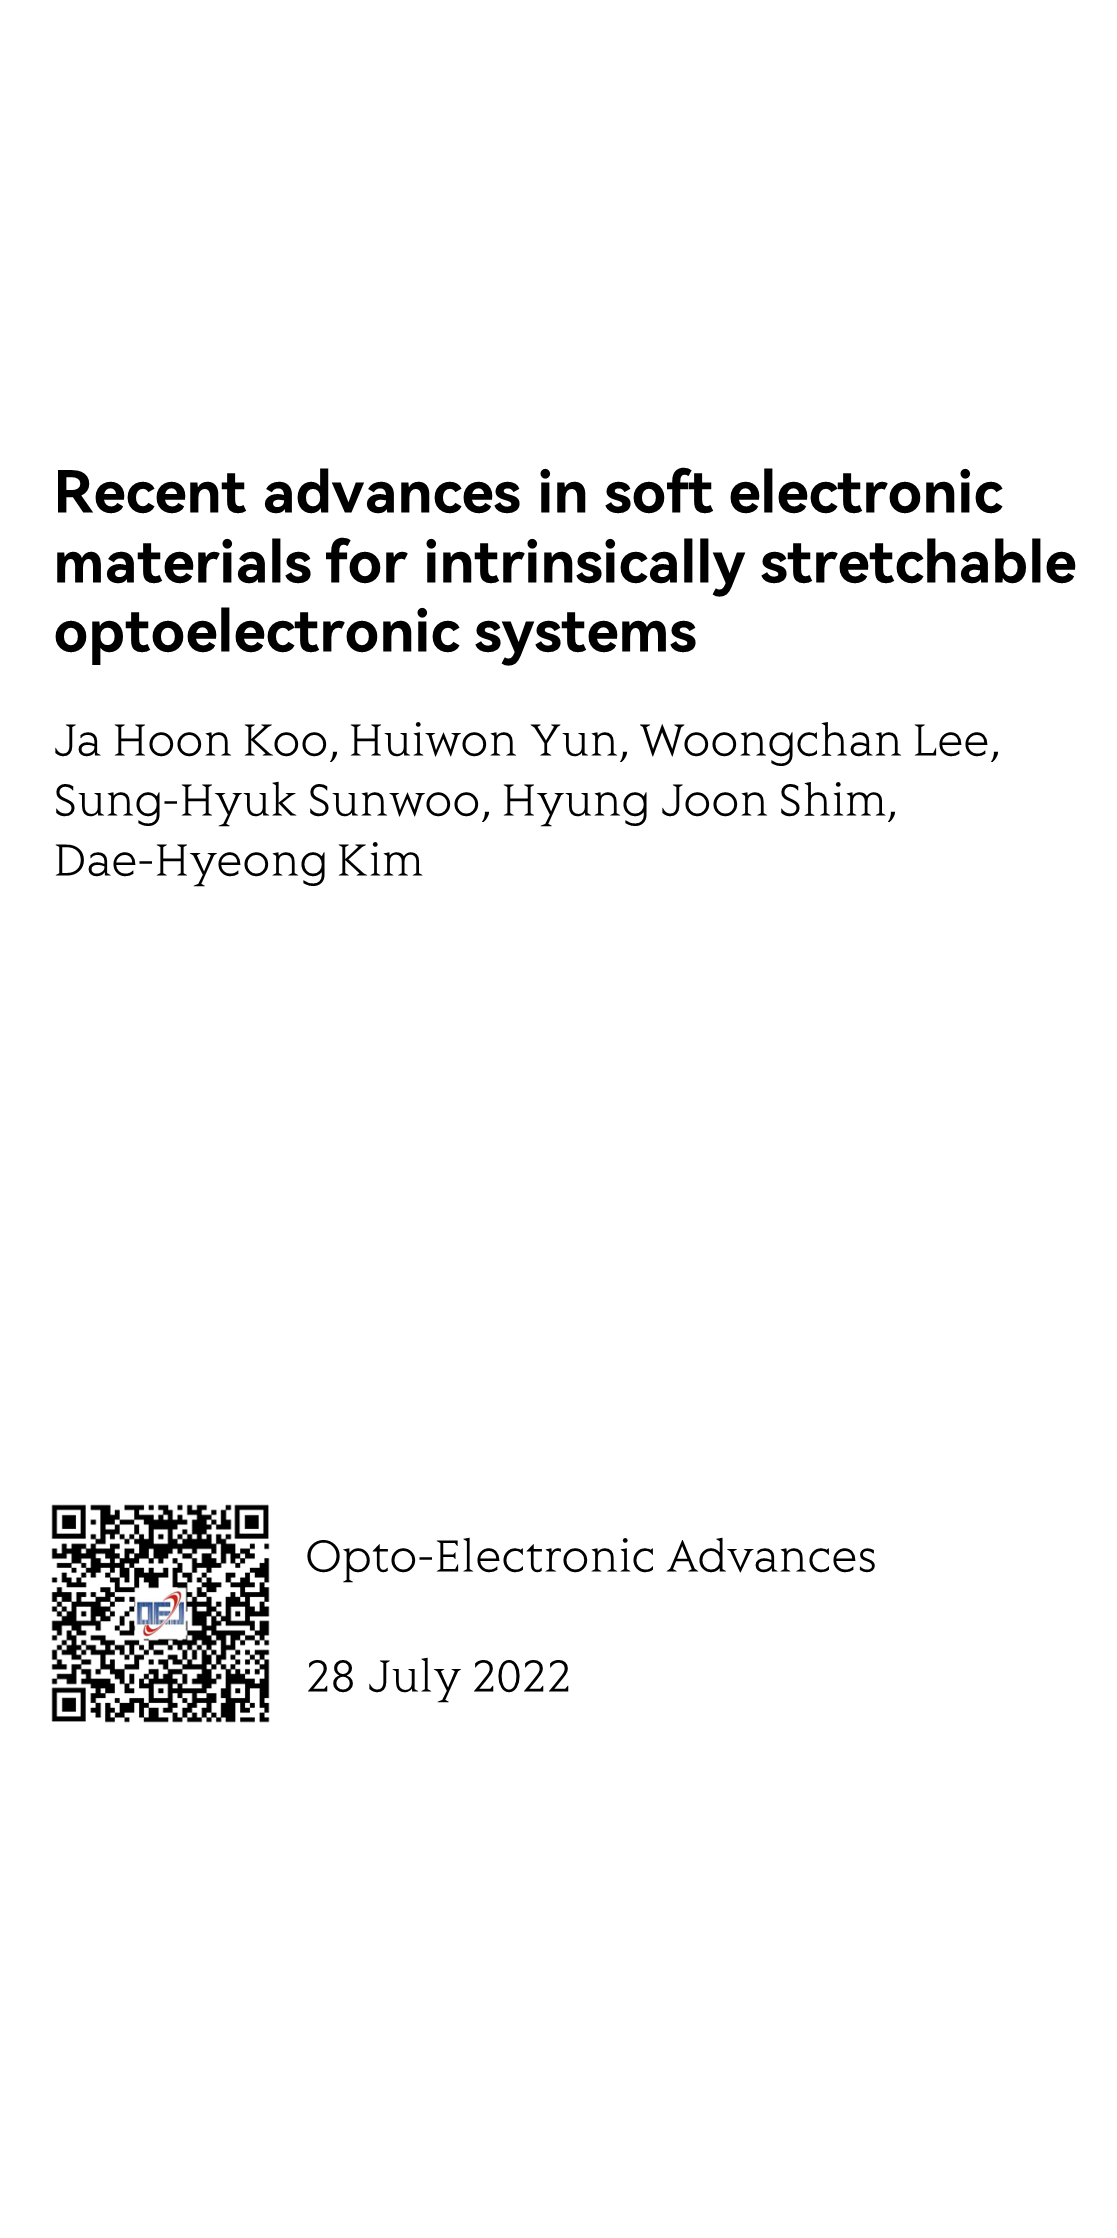 Recent advances in soft electronic materials for intrinsically stretchable optoelectronic systems_1